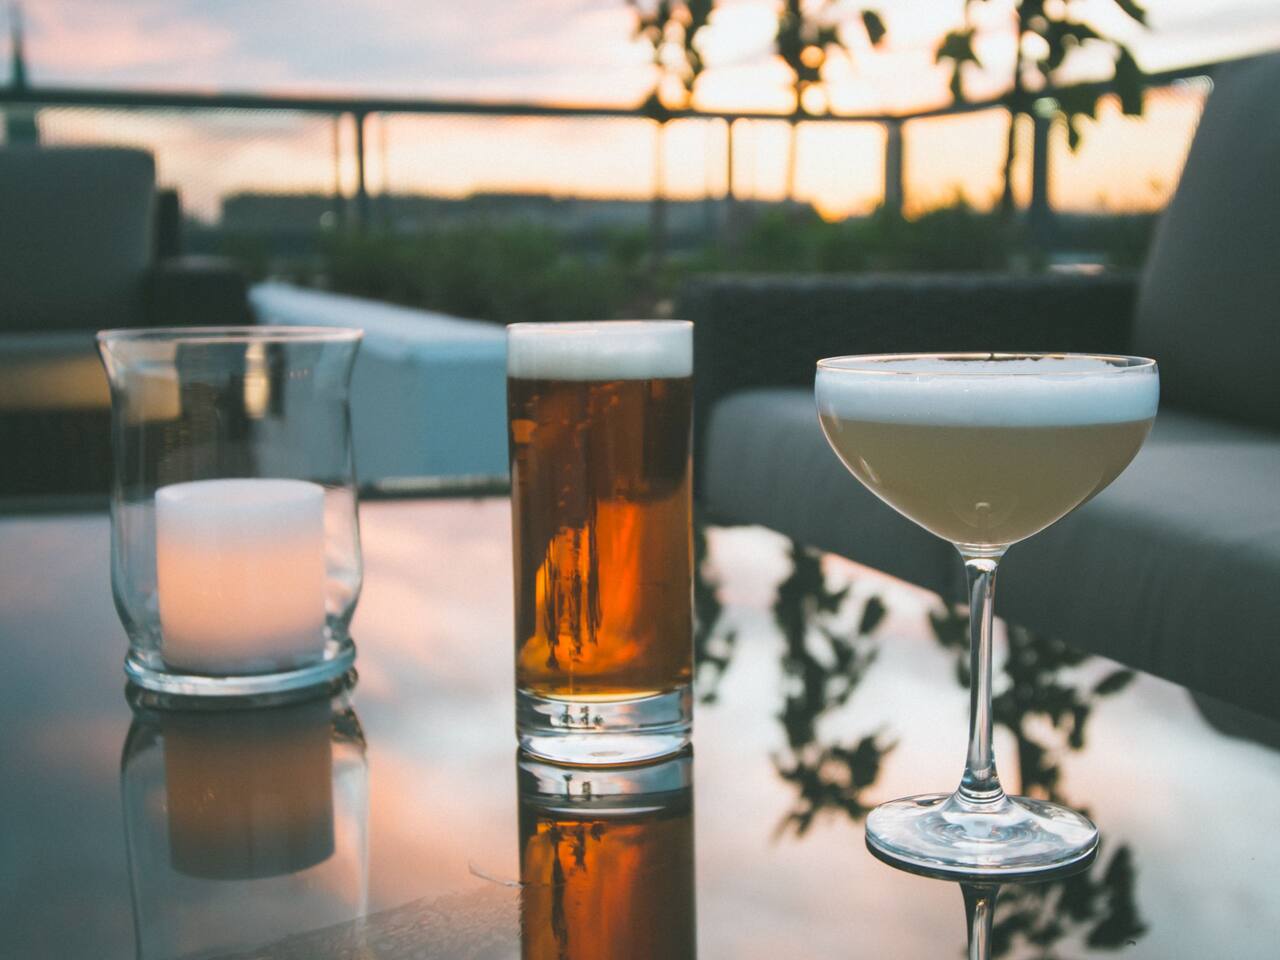 Drinks at Sunset